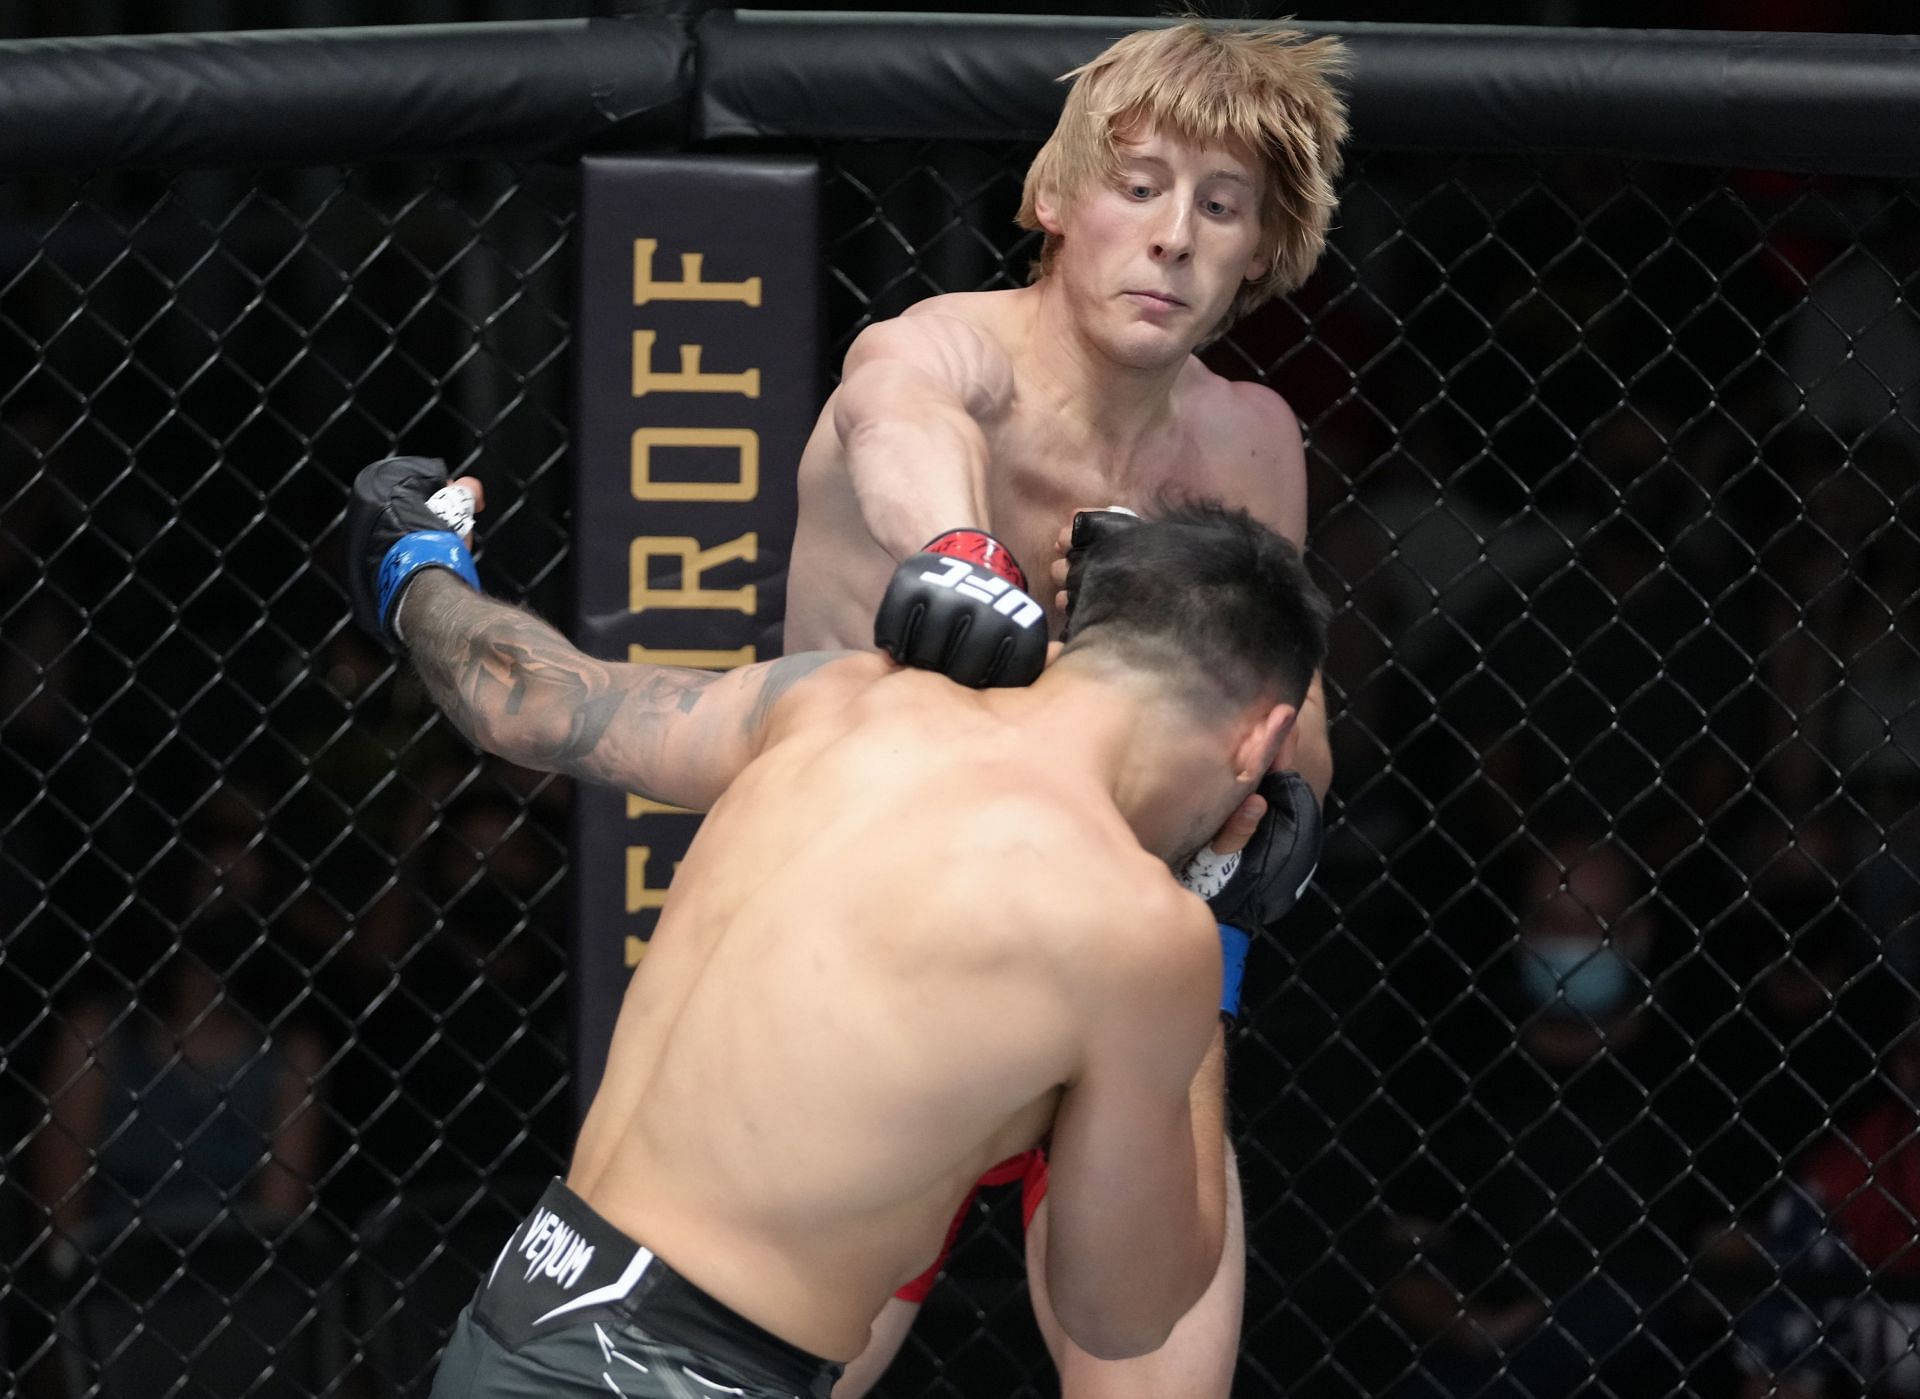 There is considerable hype around prospect Paddy Pimblett right now